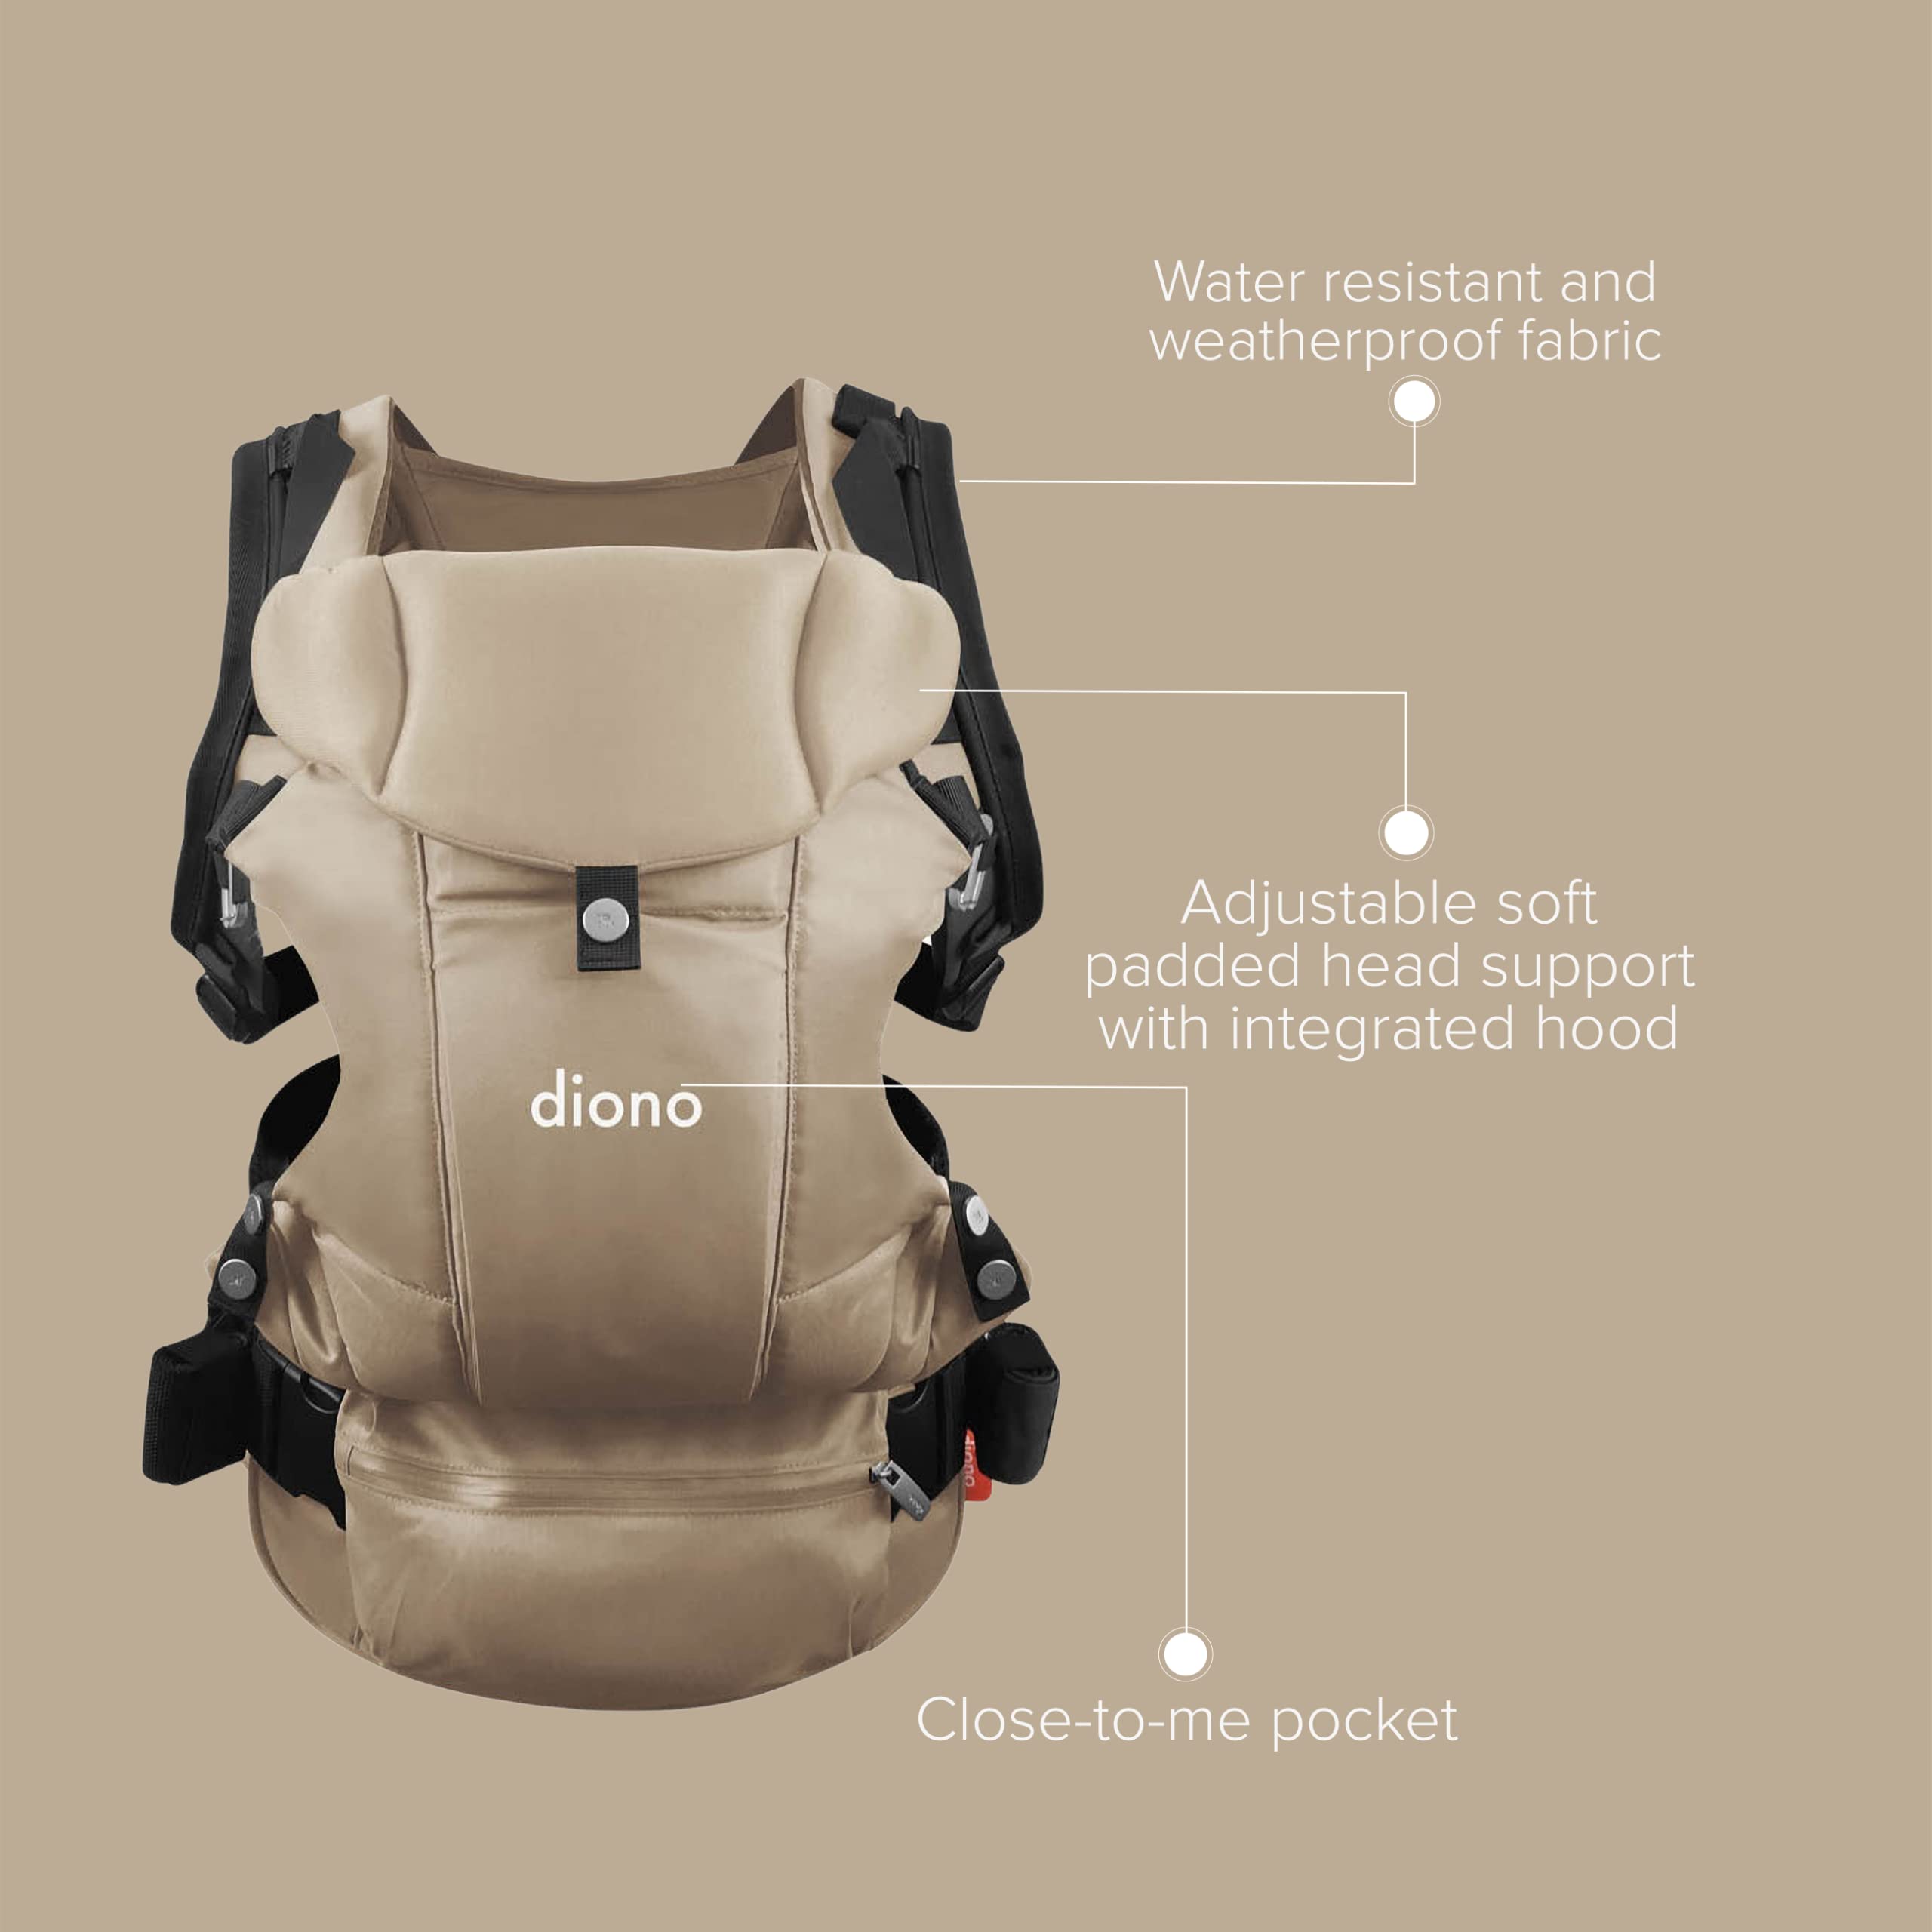 Diono Carus Essentials 3-in-1 Baby Carrier, Front Carry & Back Carry, Newborn to Toddler up to 33 lb / 15 kg, Easy to Wear Comfortable & Ergonomic, Sand